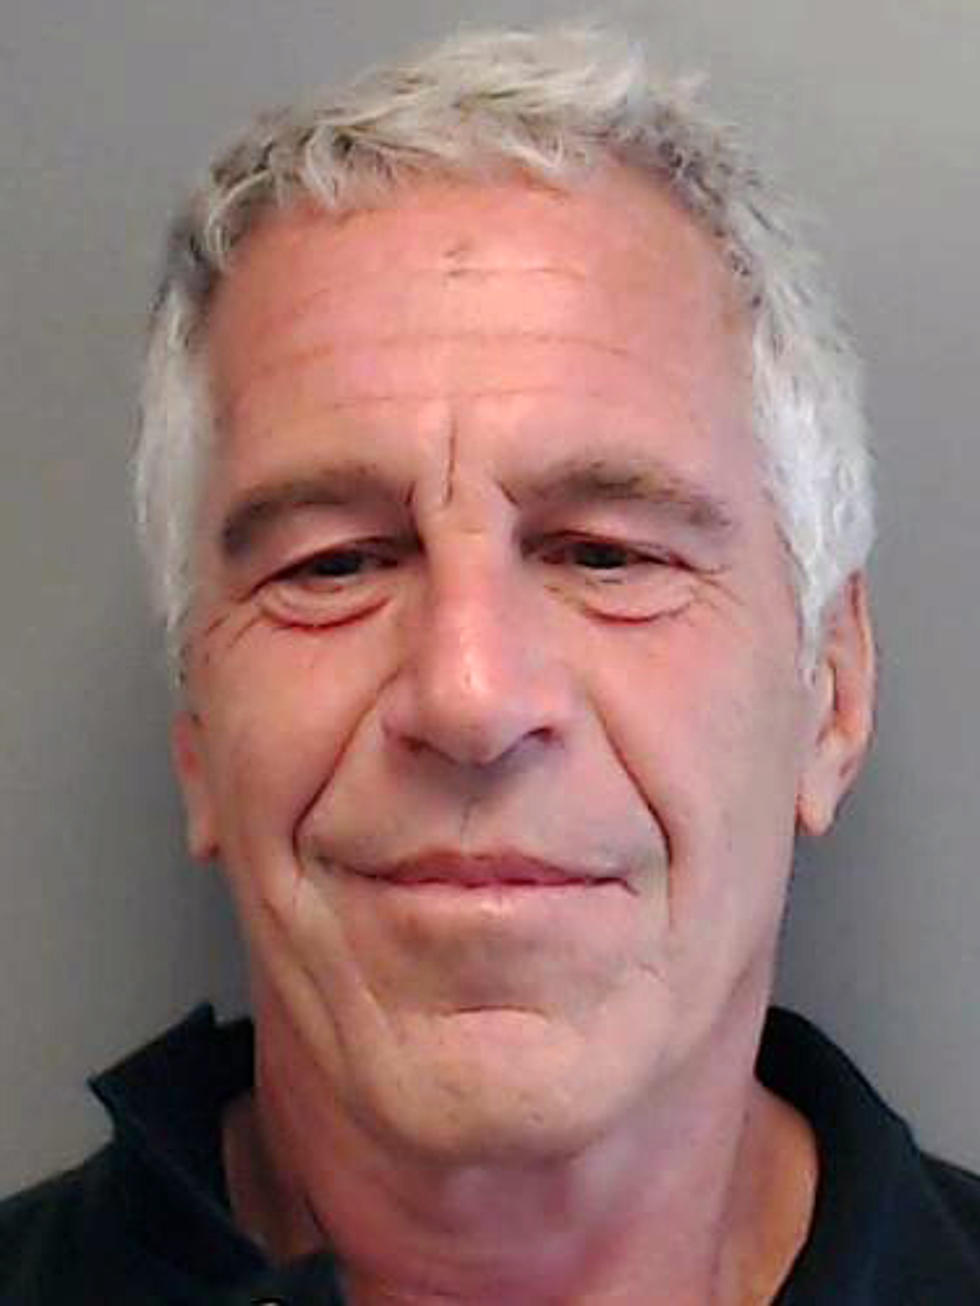 Officials: Jeffrey Epstein Dies by Suicide in Jail Cell